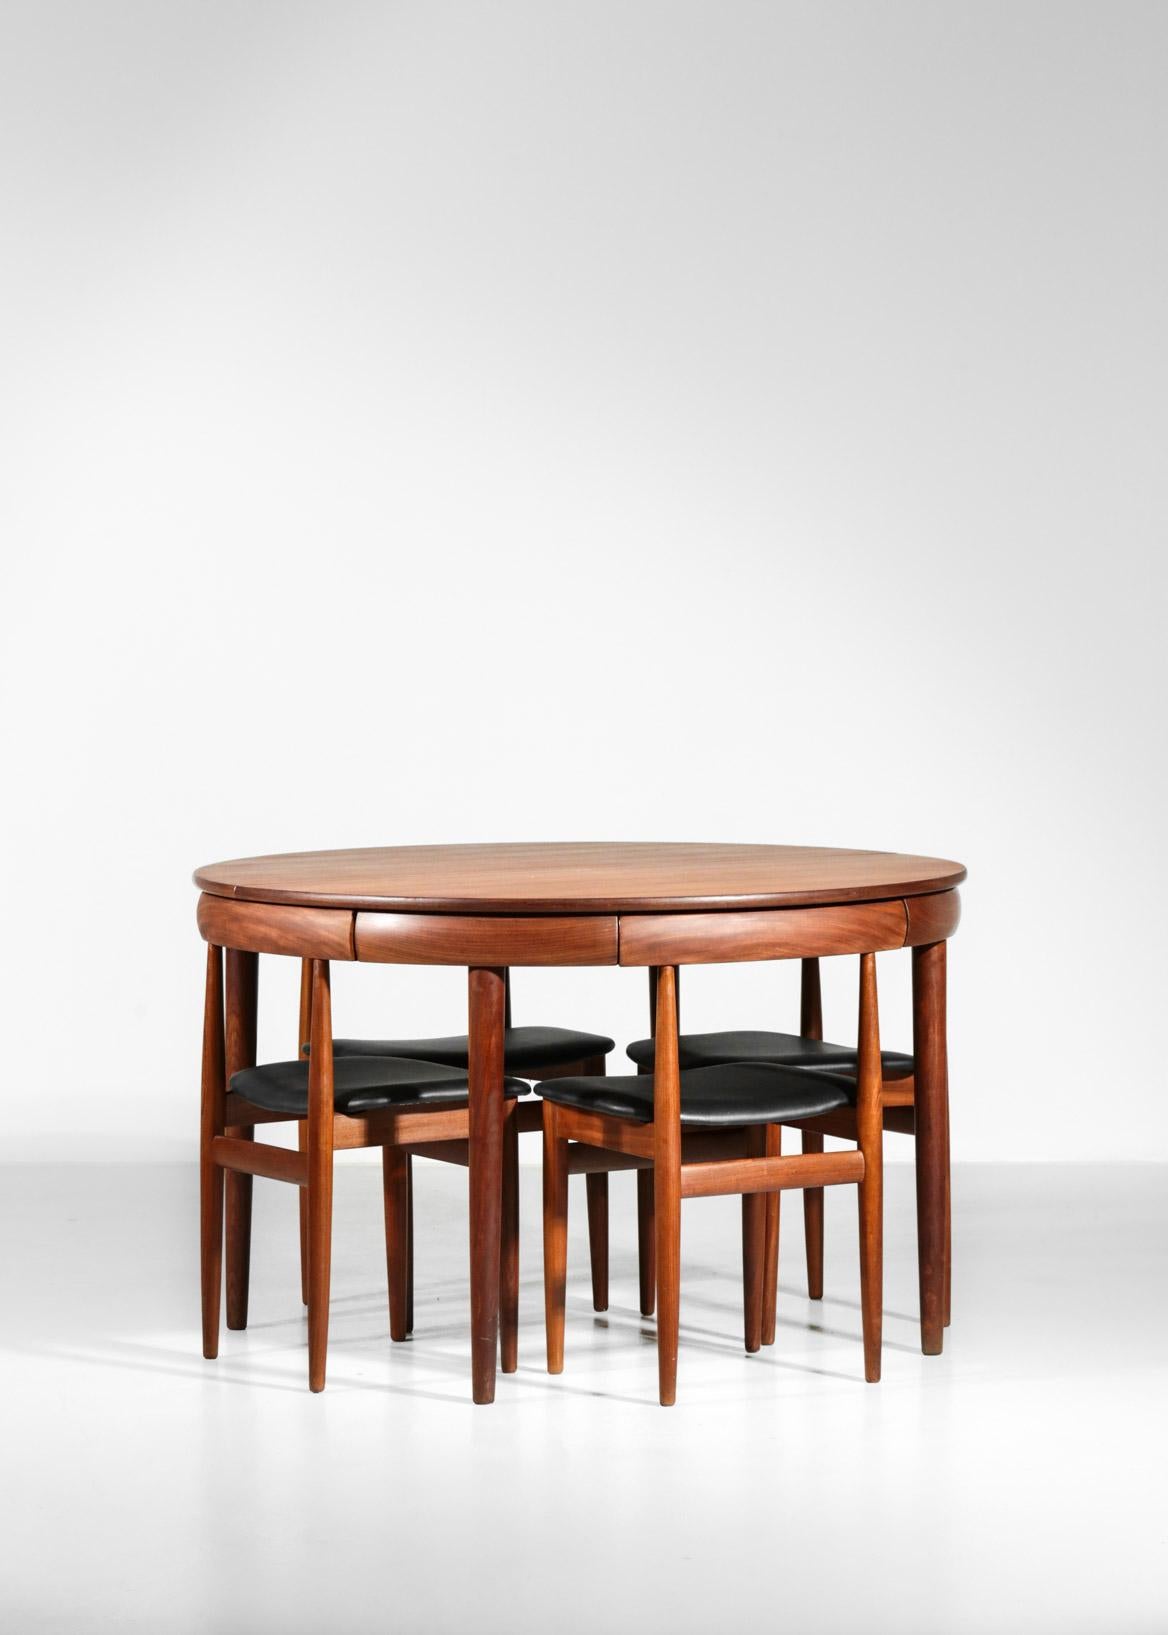 Set of 4 chairs and one dining table designed by Hans Olsen.
One extension is included, total length 177 cm
The chairs has been reupholstered.